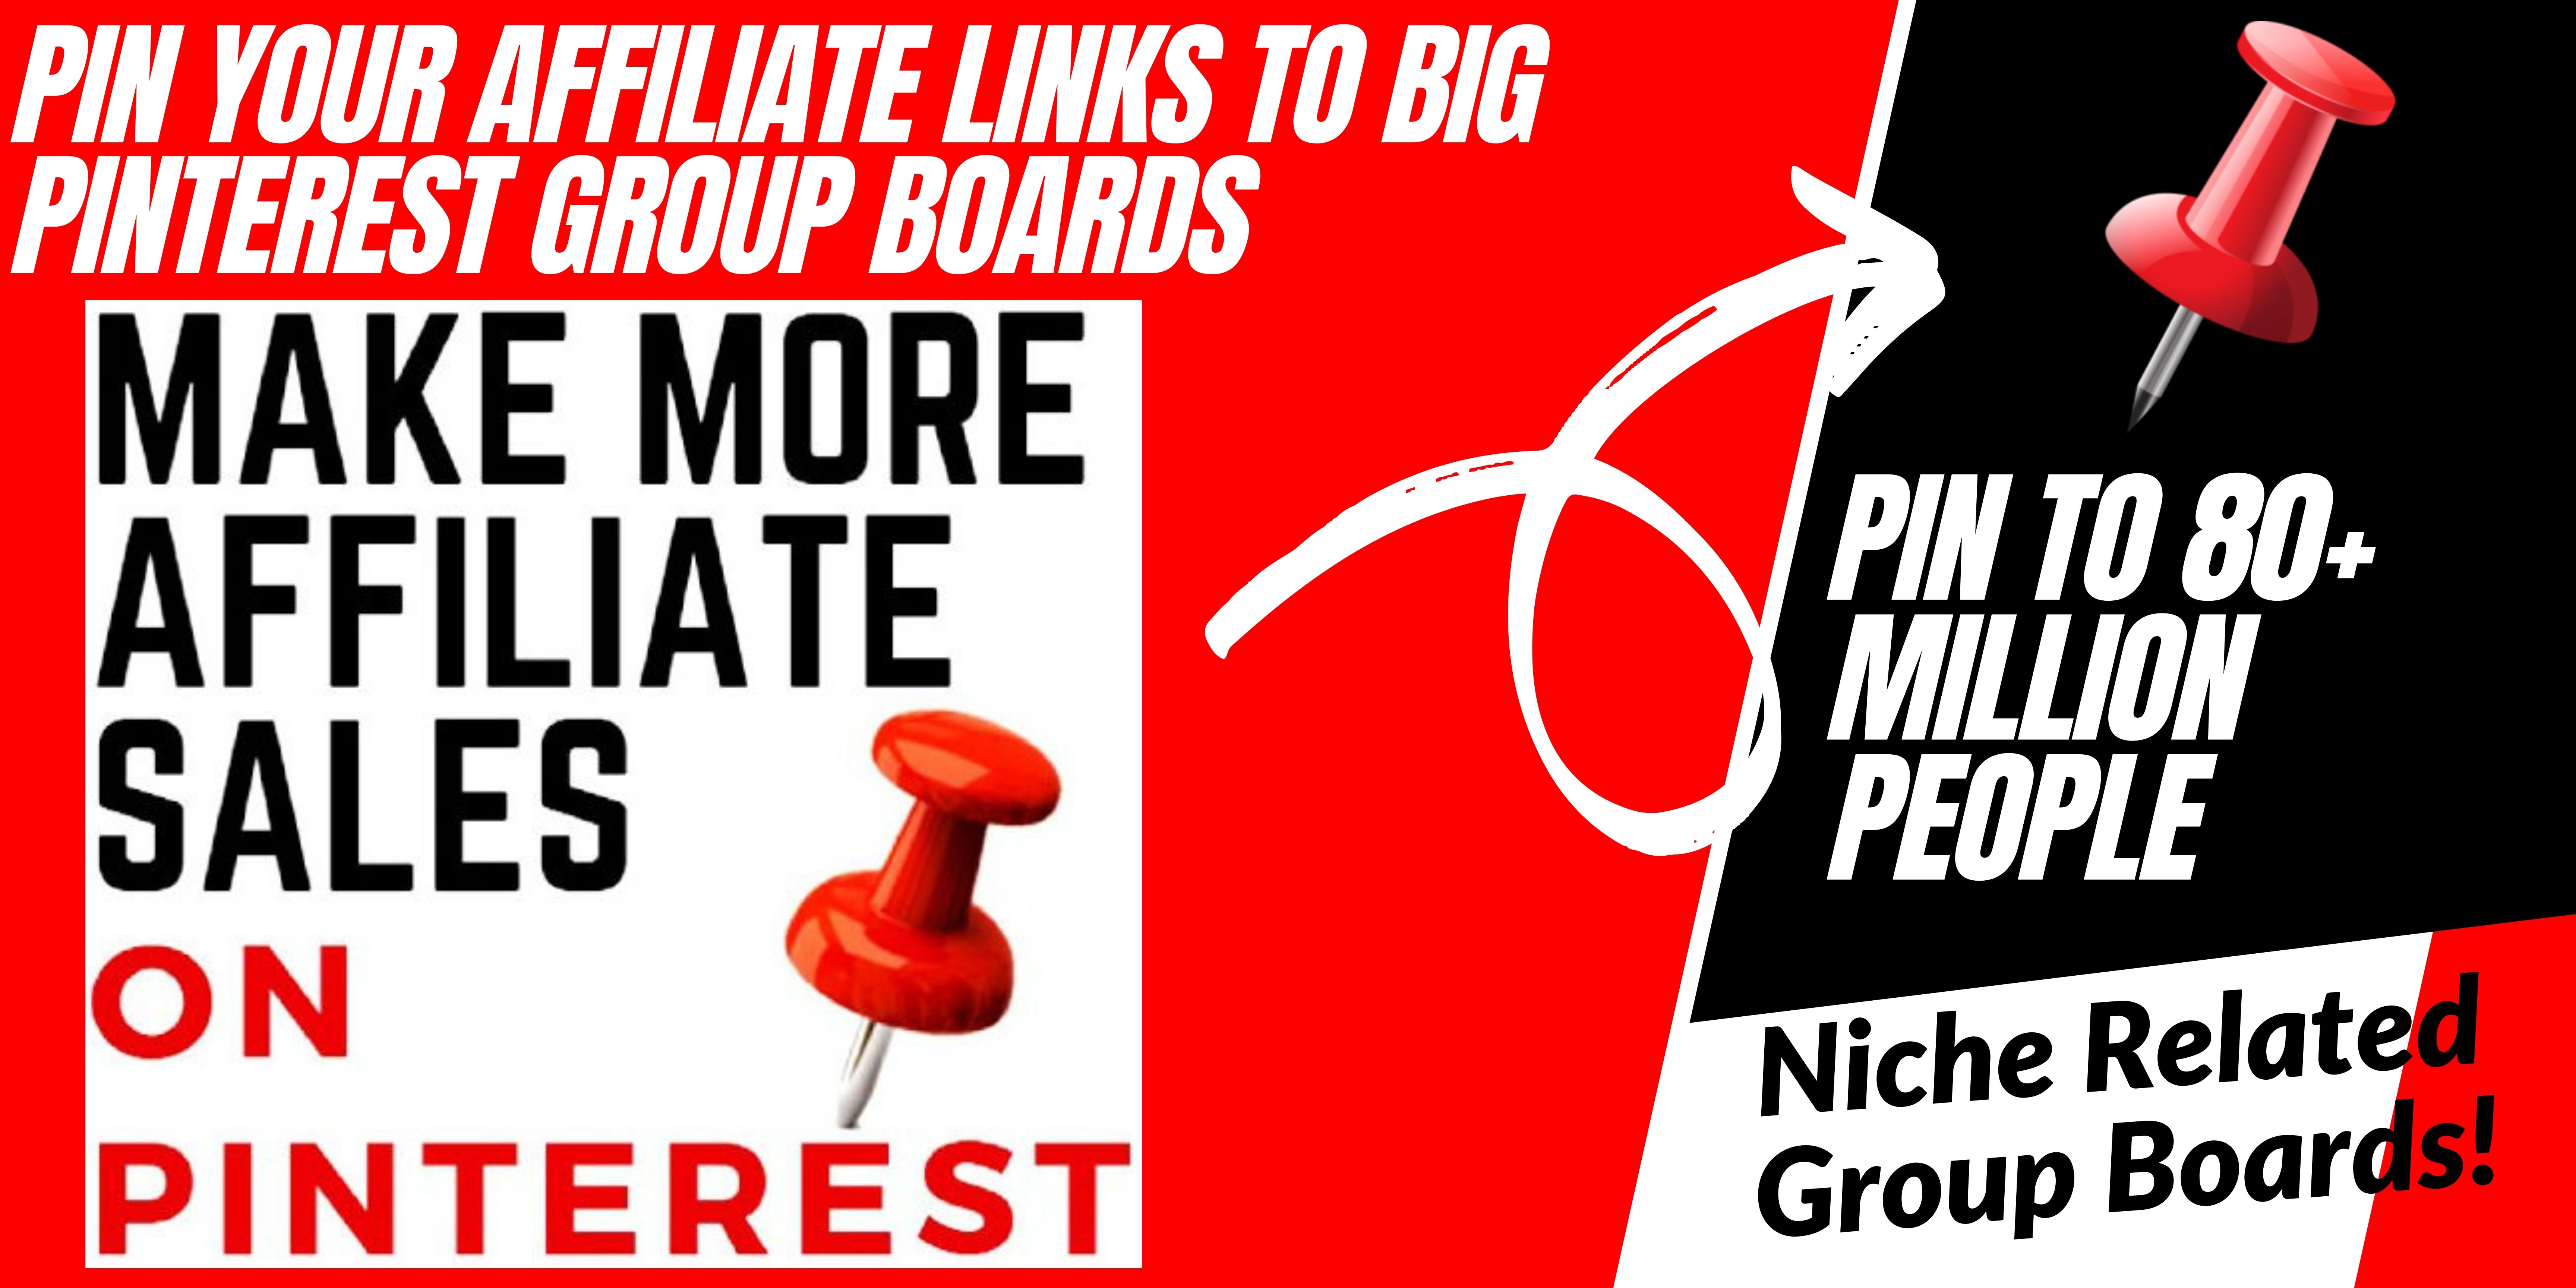 Pin Your Affiliate Website Links to Big Pinterest Group Boards - Get More Affiliate Sales!